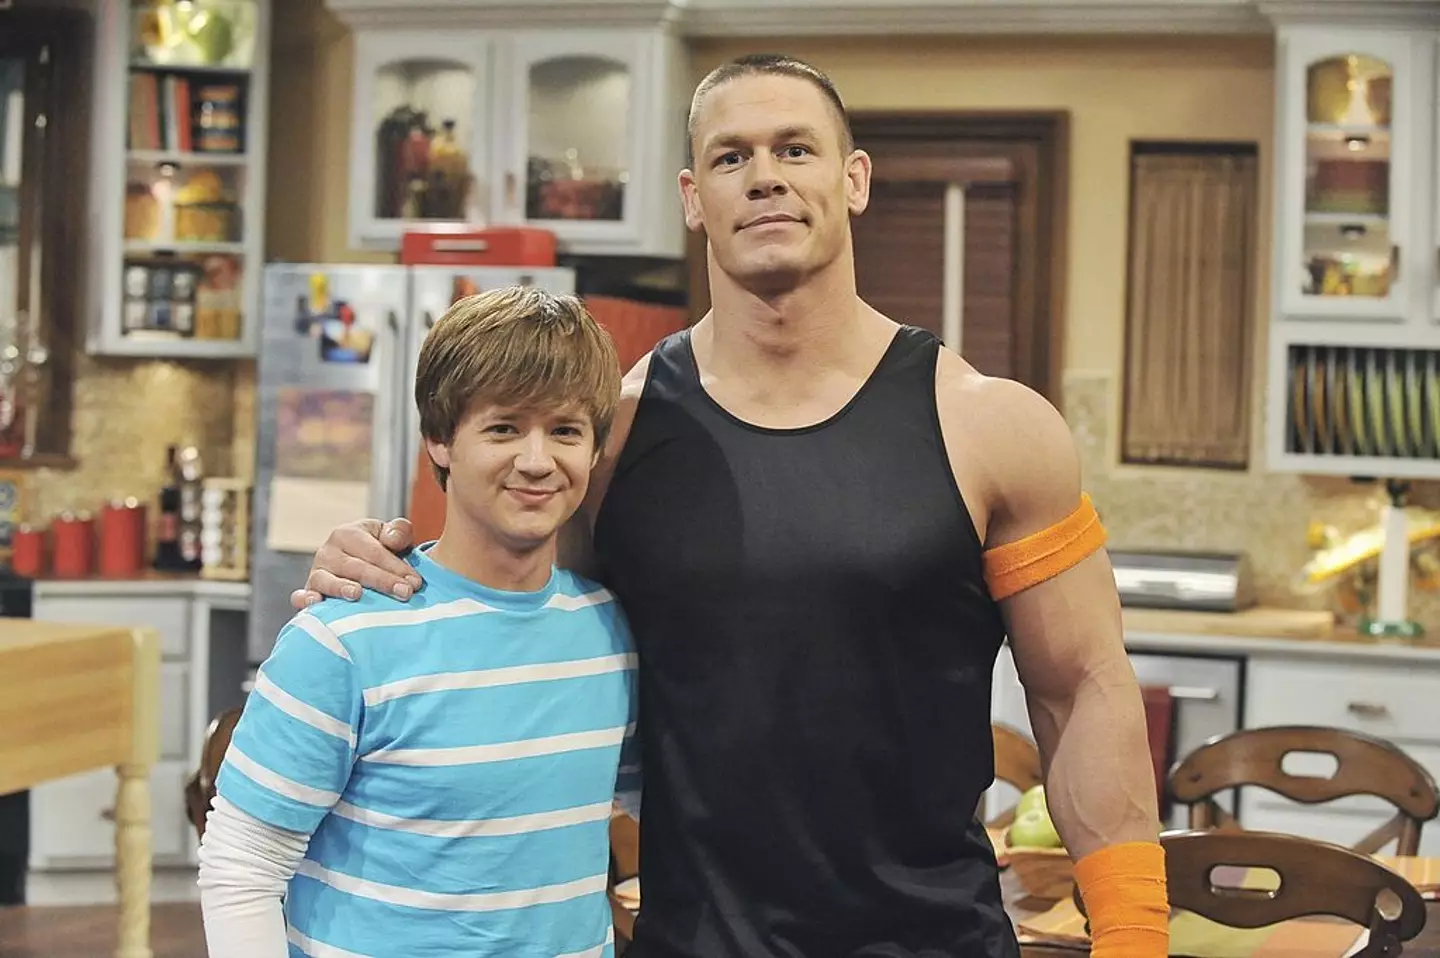 John Cena and Jason Earles were both 30 when this picture was taken. Yes, really. (Eric McCandless/Disney Channel via Getty Images